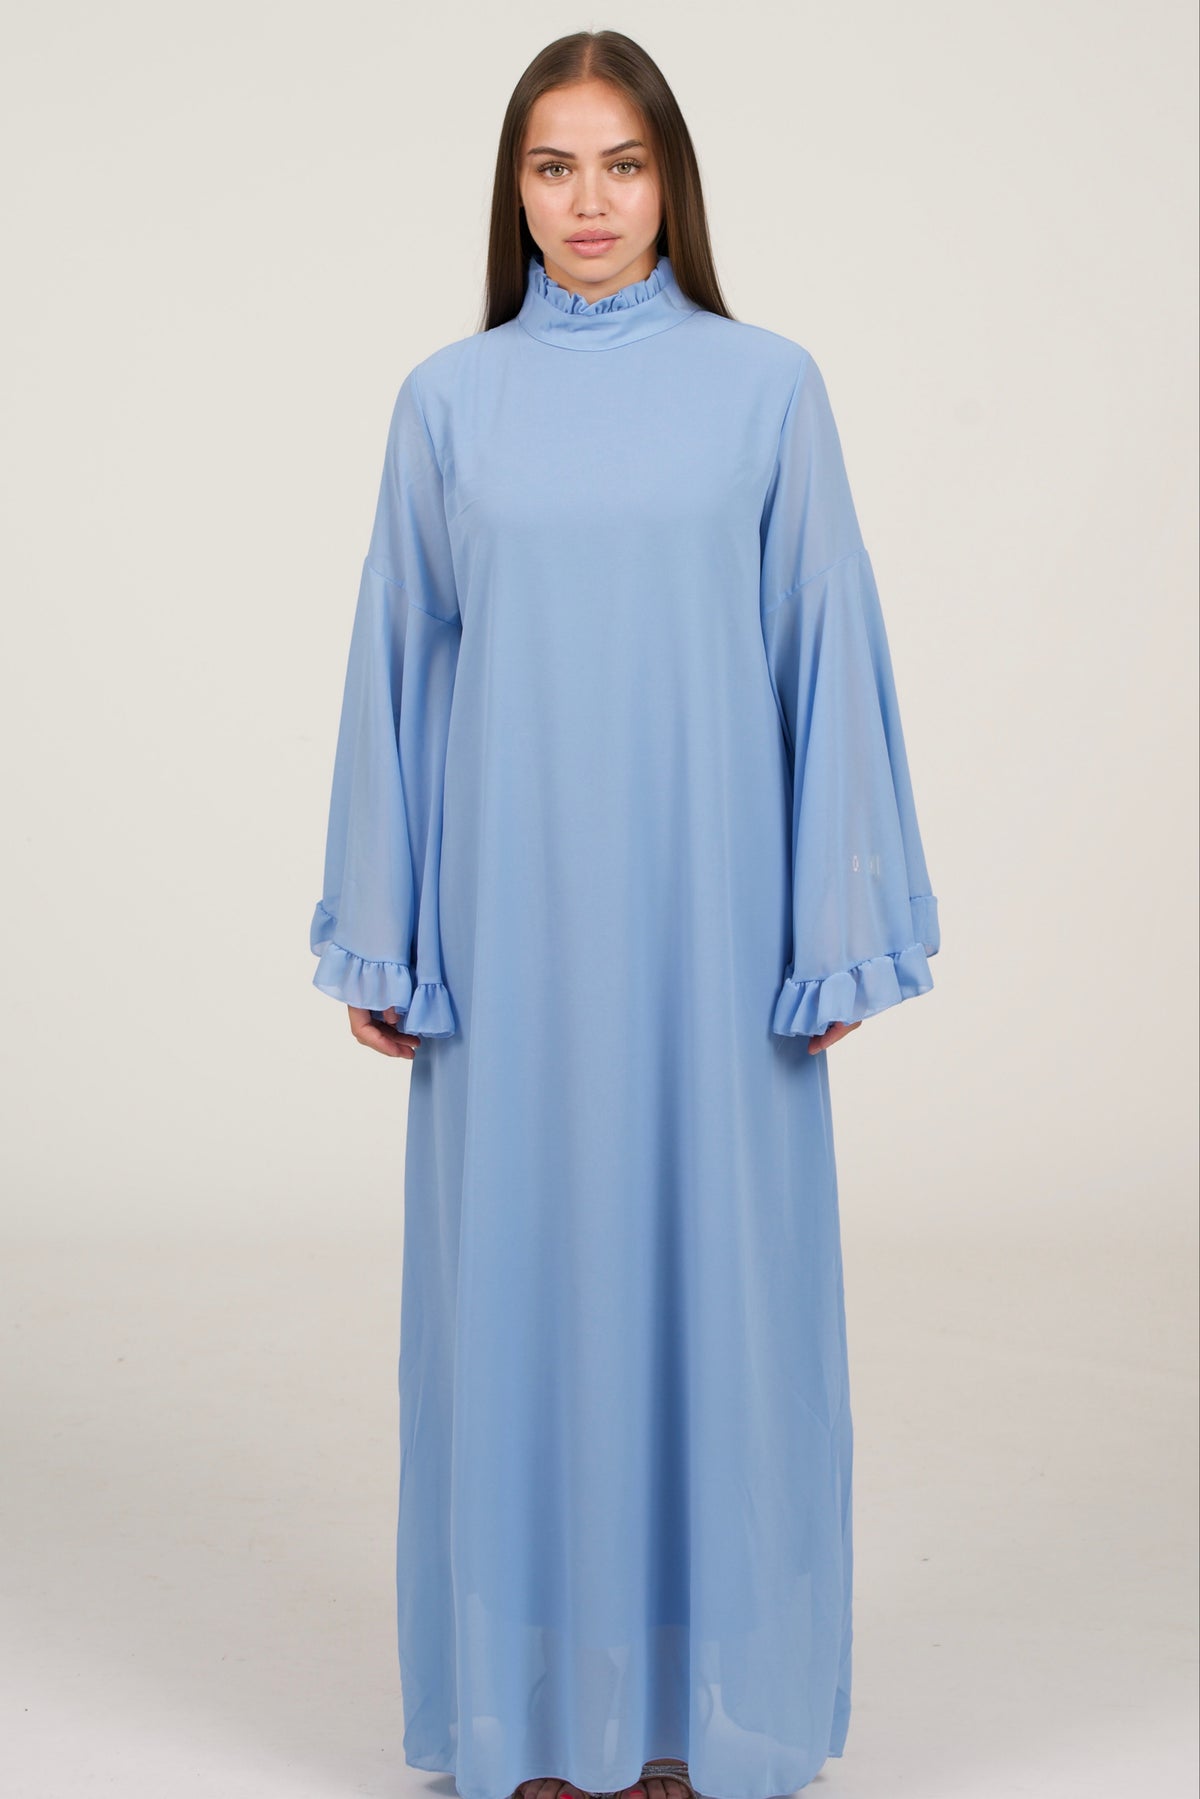 Light Blue Classic Dress With Detailed Sleeves